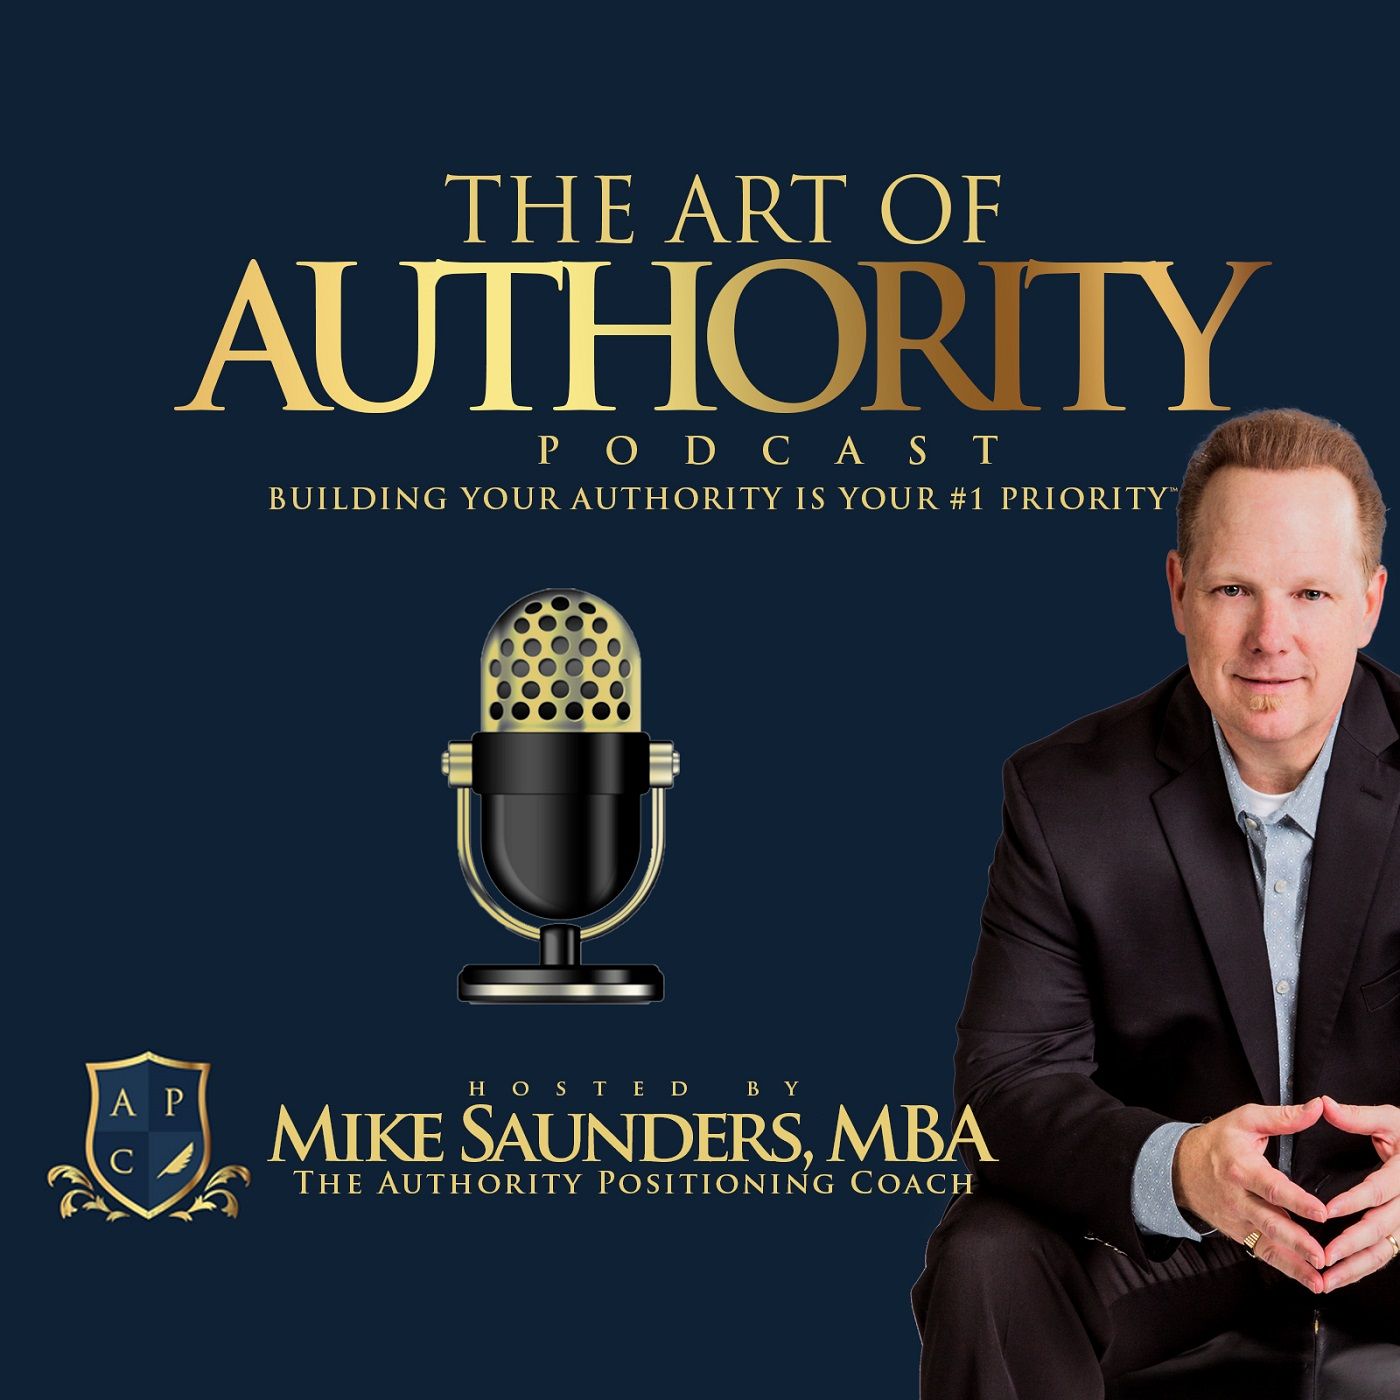 The Art of Authority Podcast